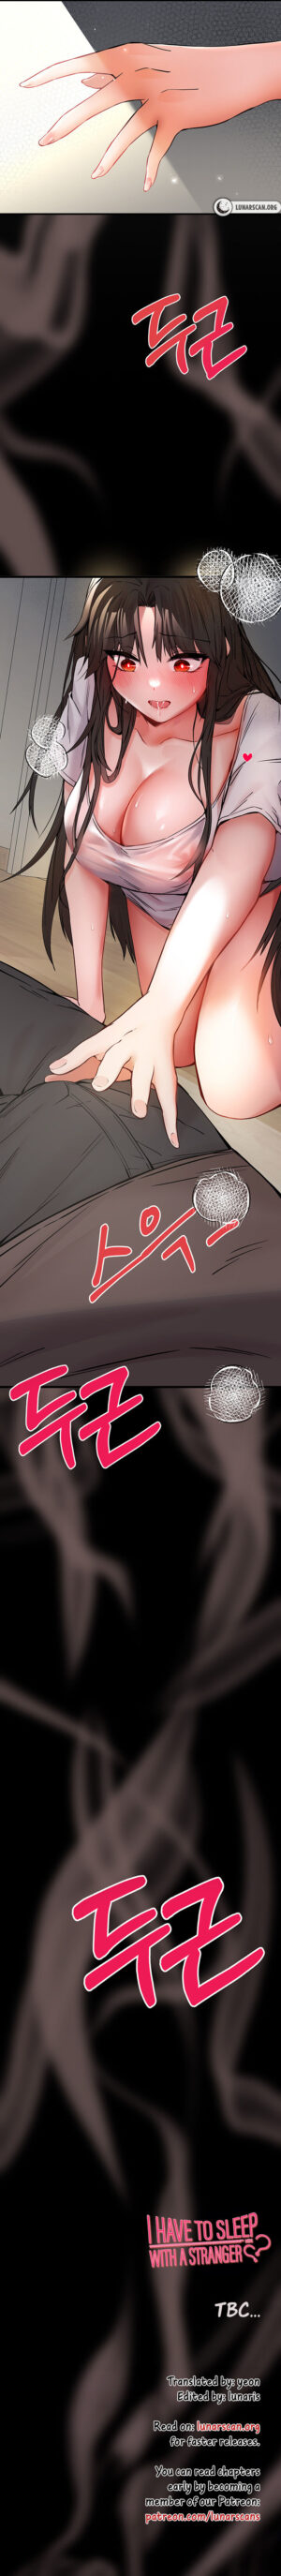 [Duke Hangul, Na Sunhyang] I Have To Sleep With A Stranger? (1-15) [English] [Lunar Scans] [Ongoing]